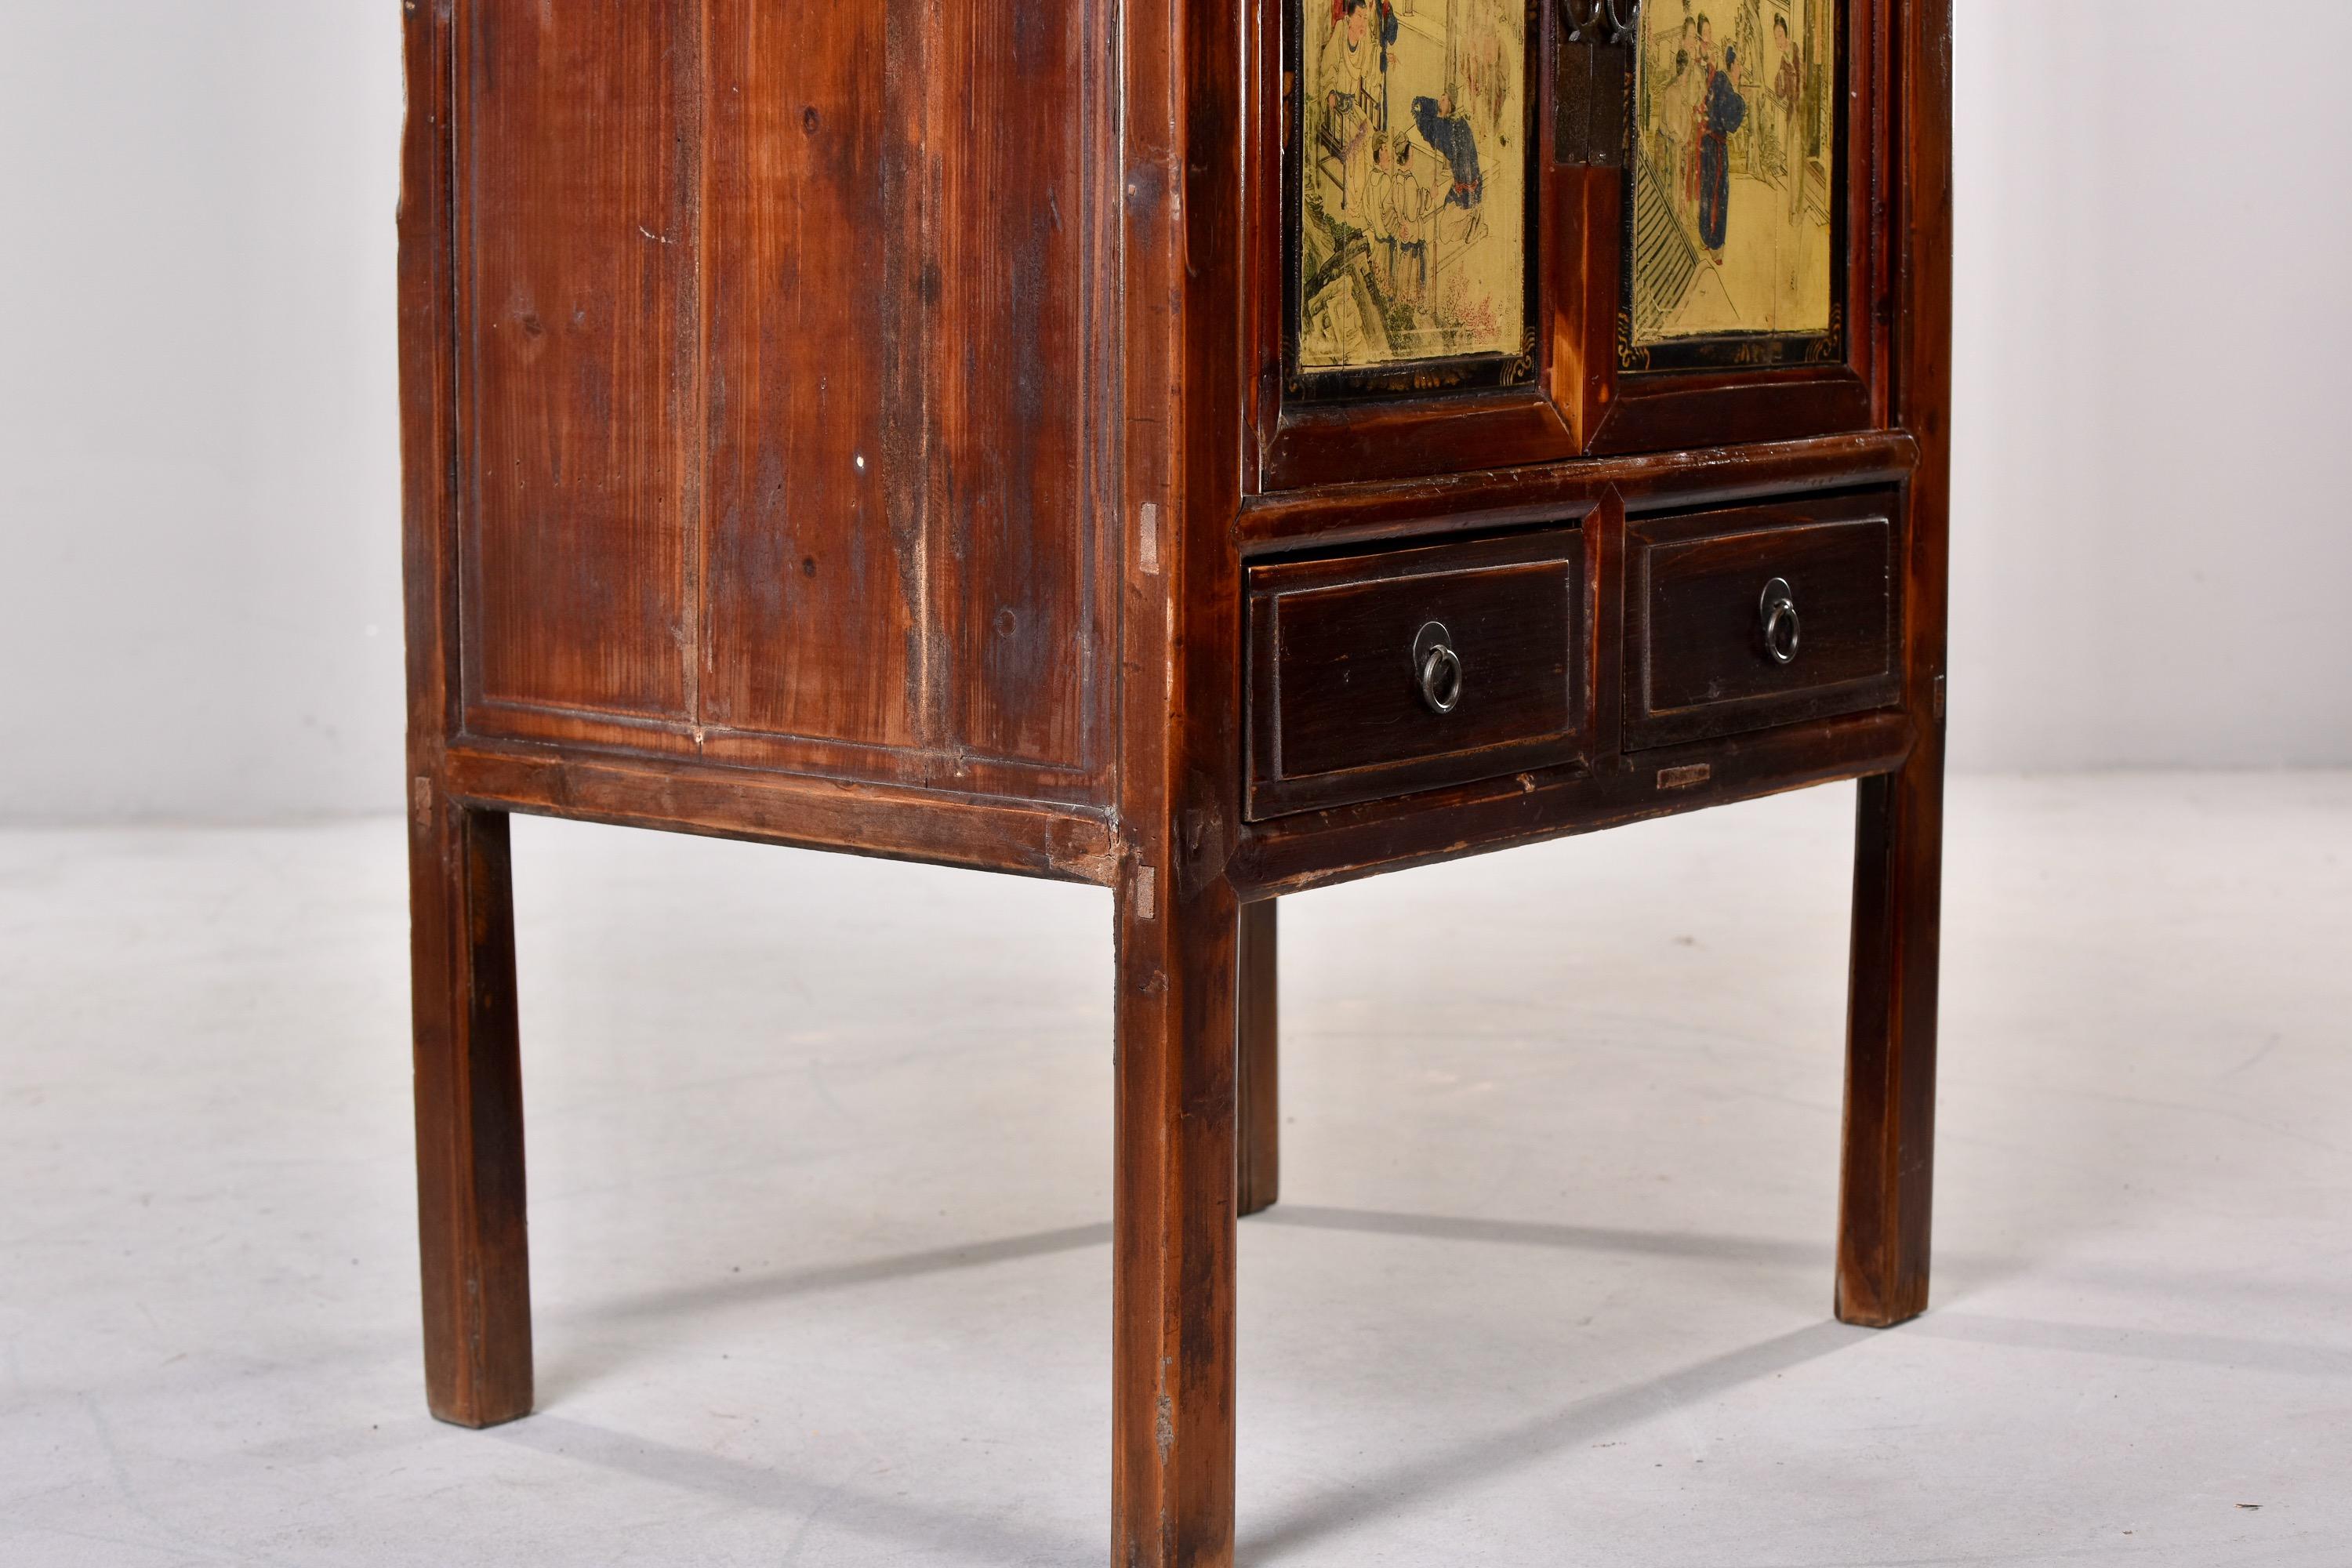 Early 20th C Tall Narrow Chinese Cabinet with Painted Opera Scenes For Sale 2